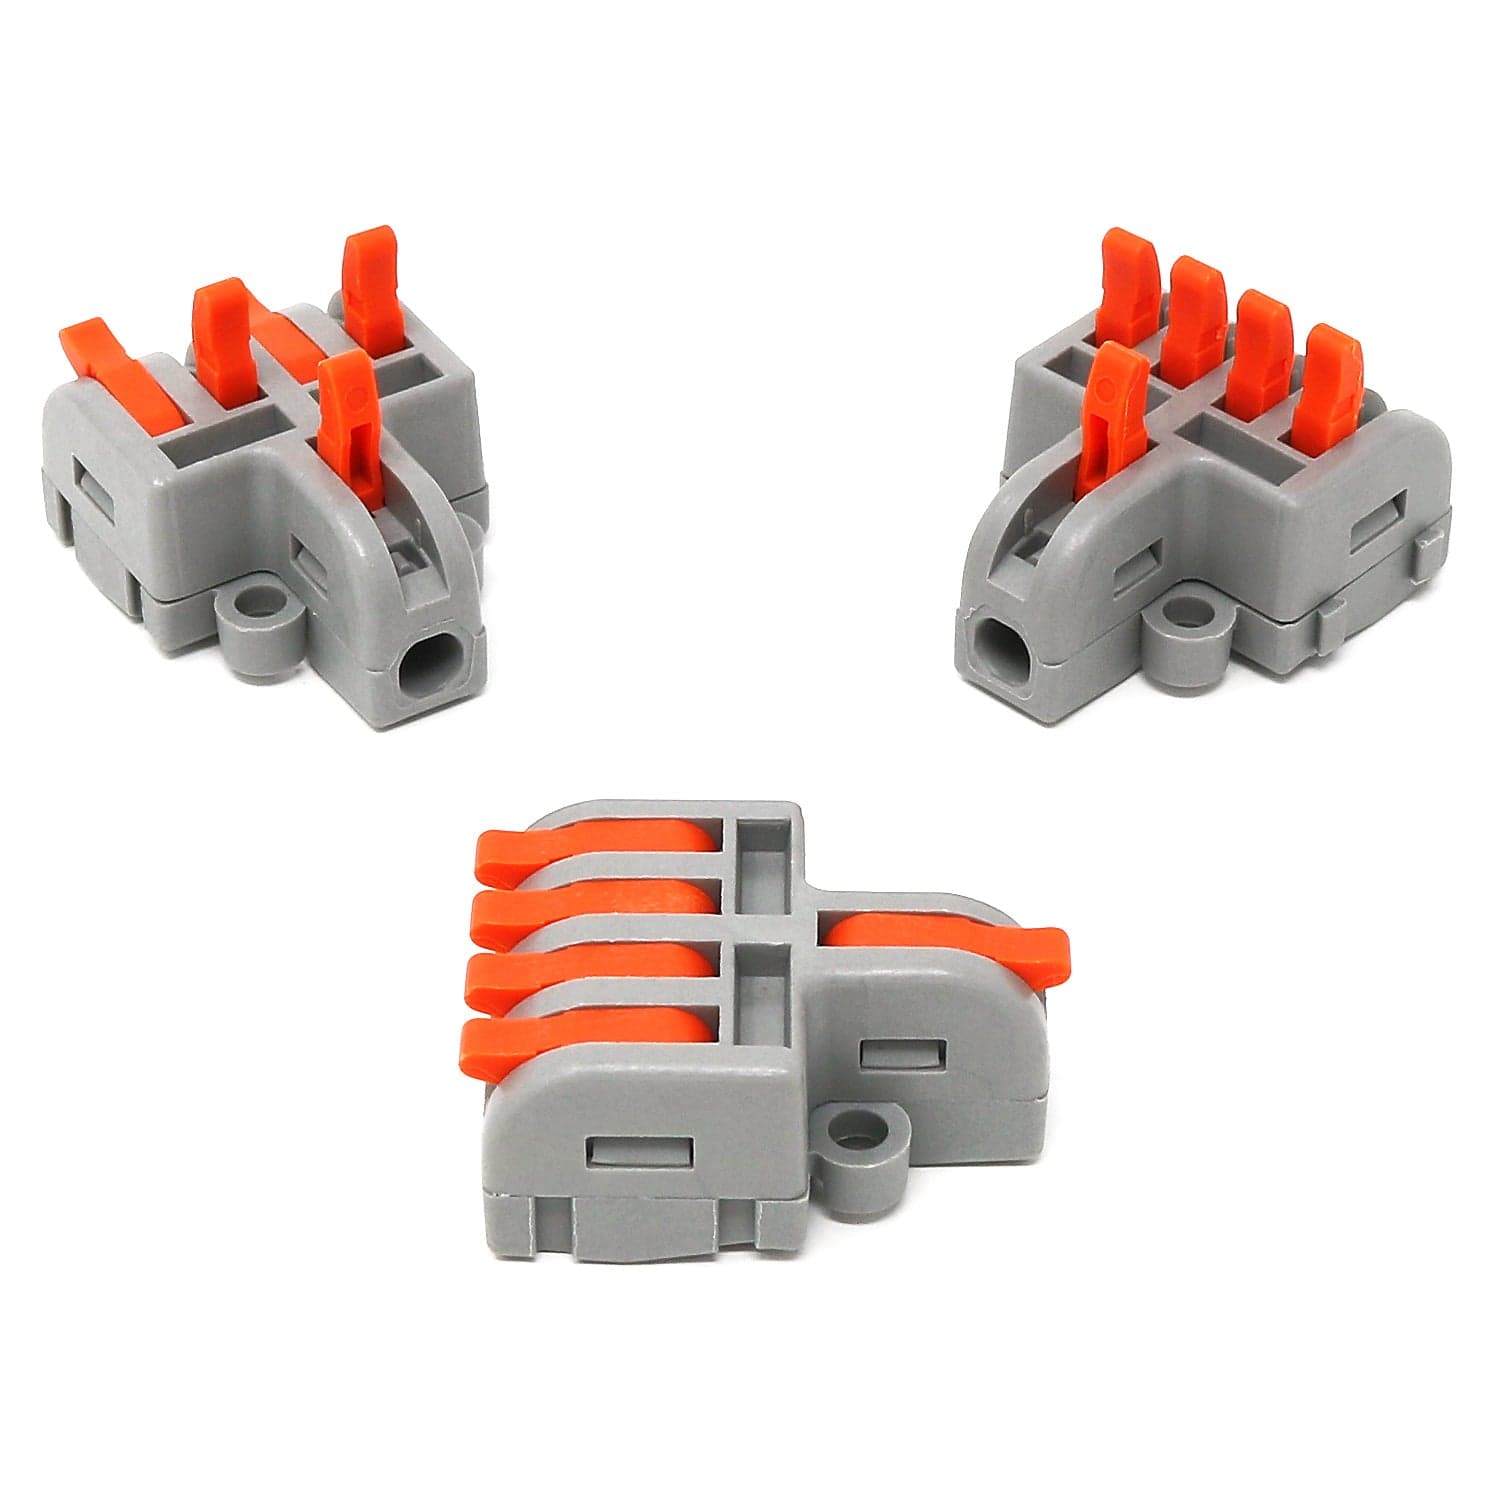 4-Way Fast Wire Splitters - Pack of 3 - The Pi Hut